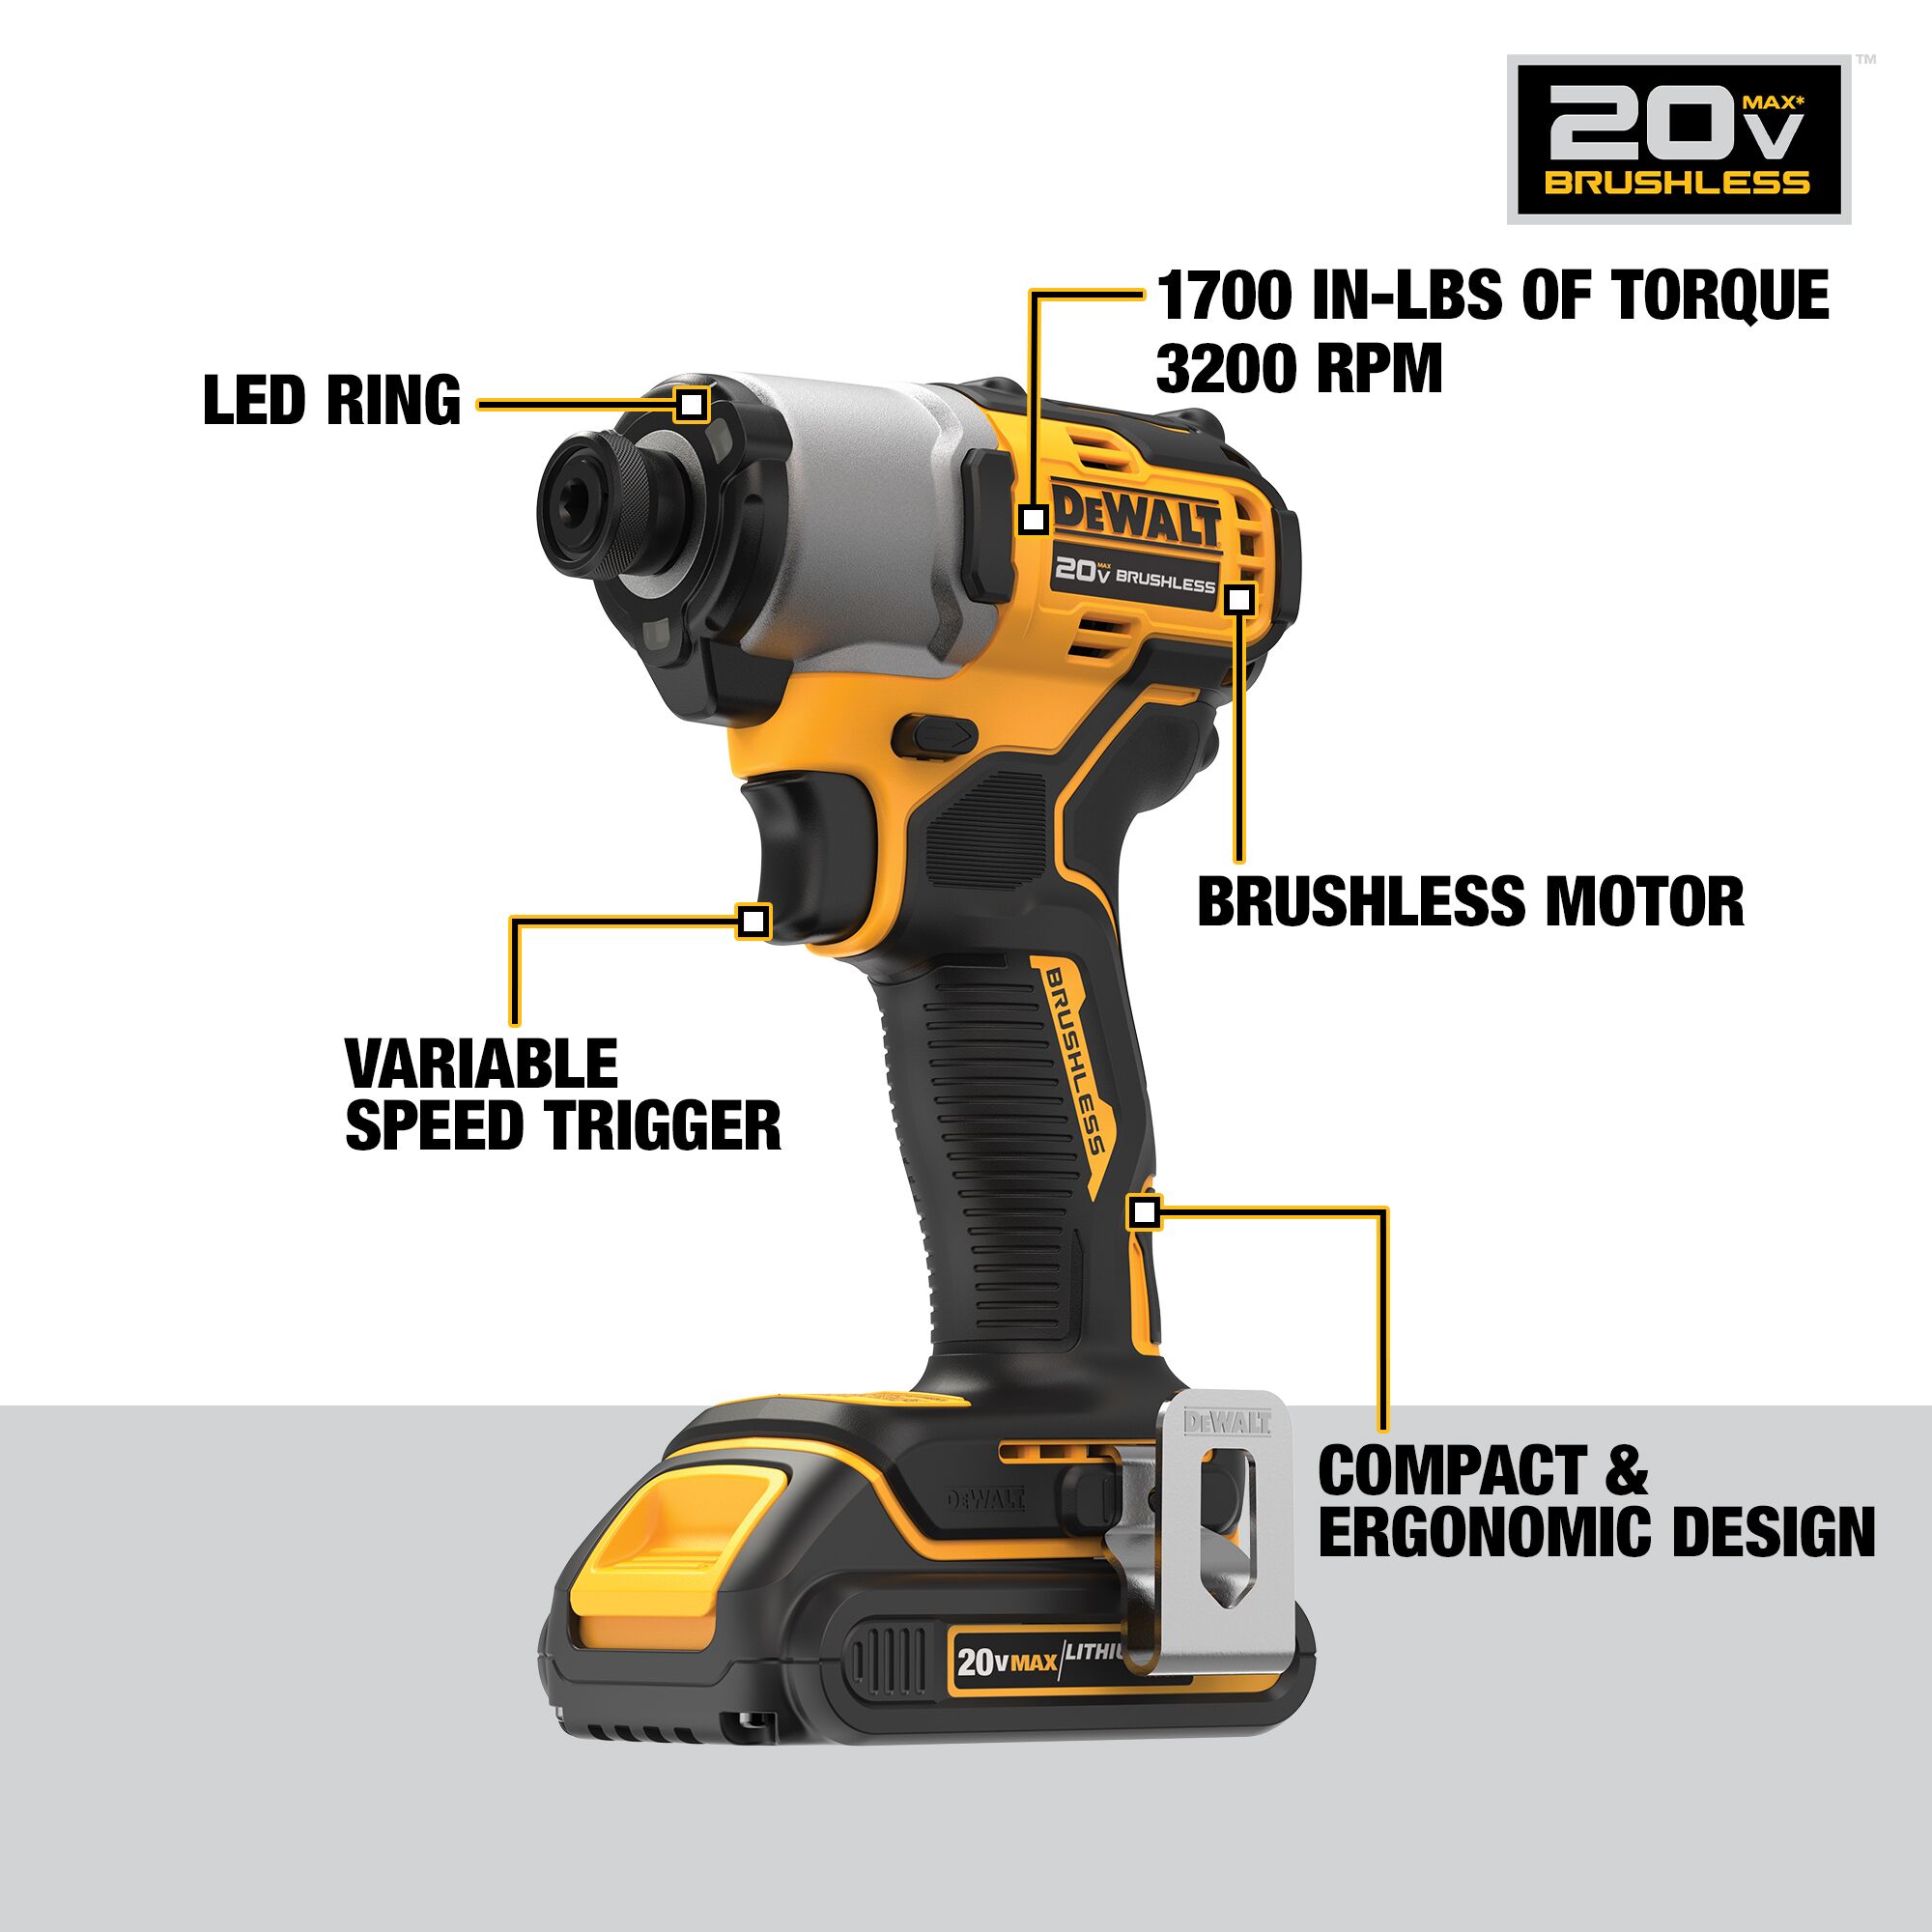 20V MAX* XR® Brushless Compact Drill/Driver Kit